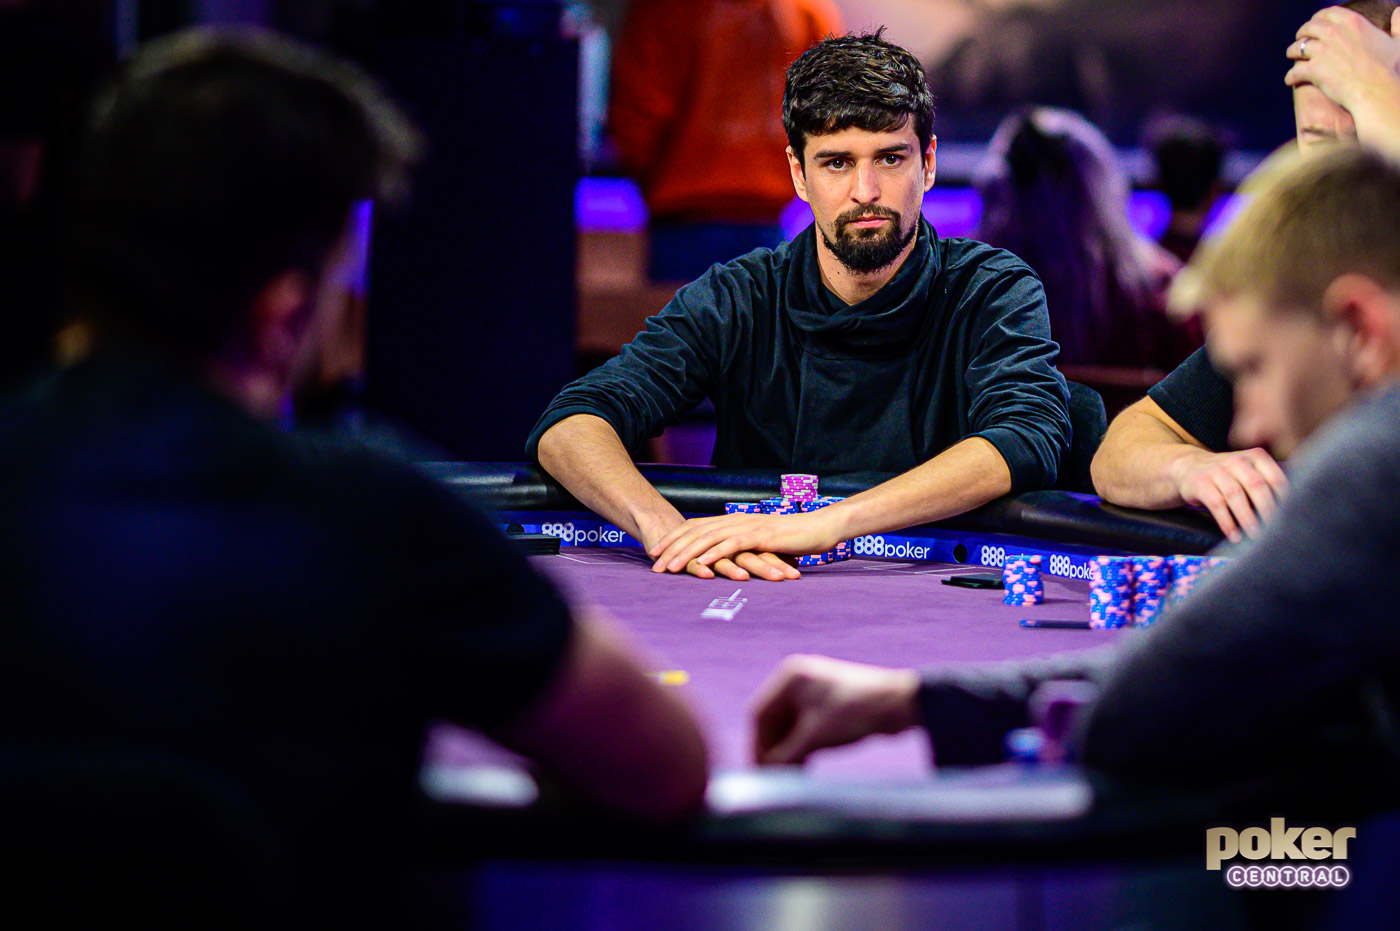 Sergi Reixach in action at the final table.